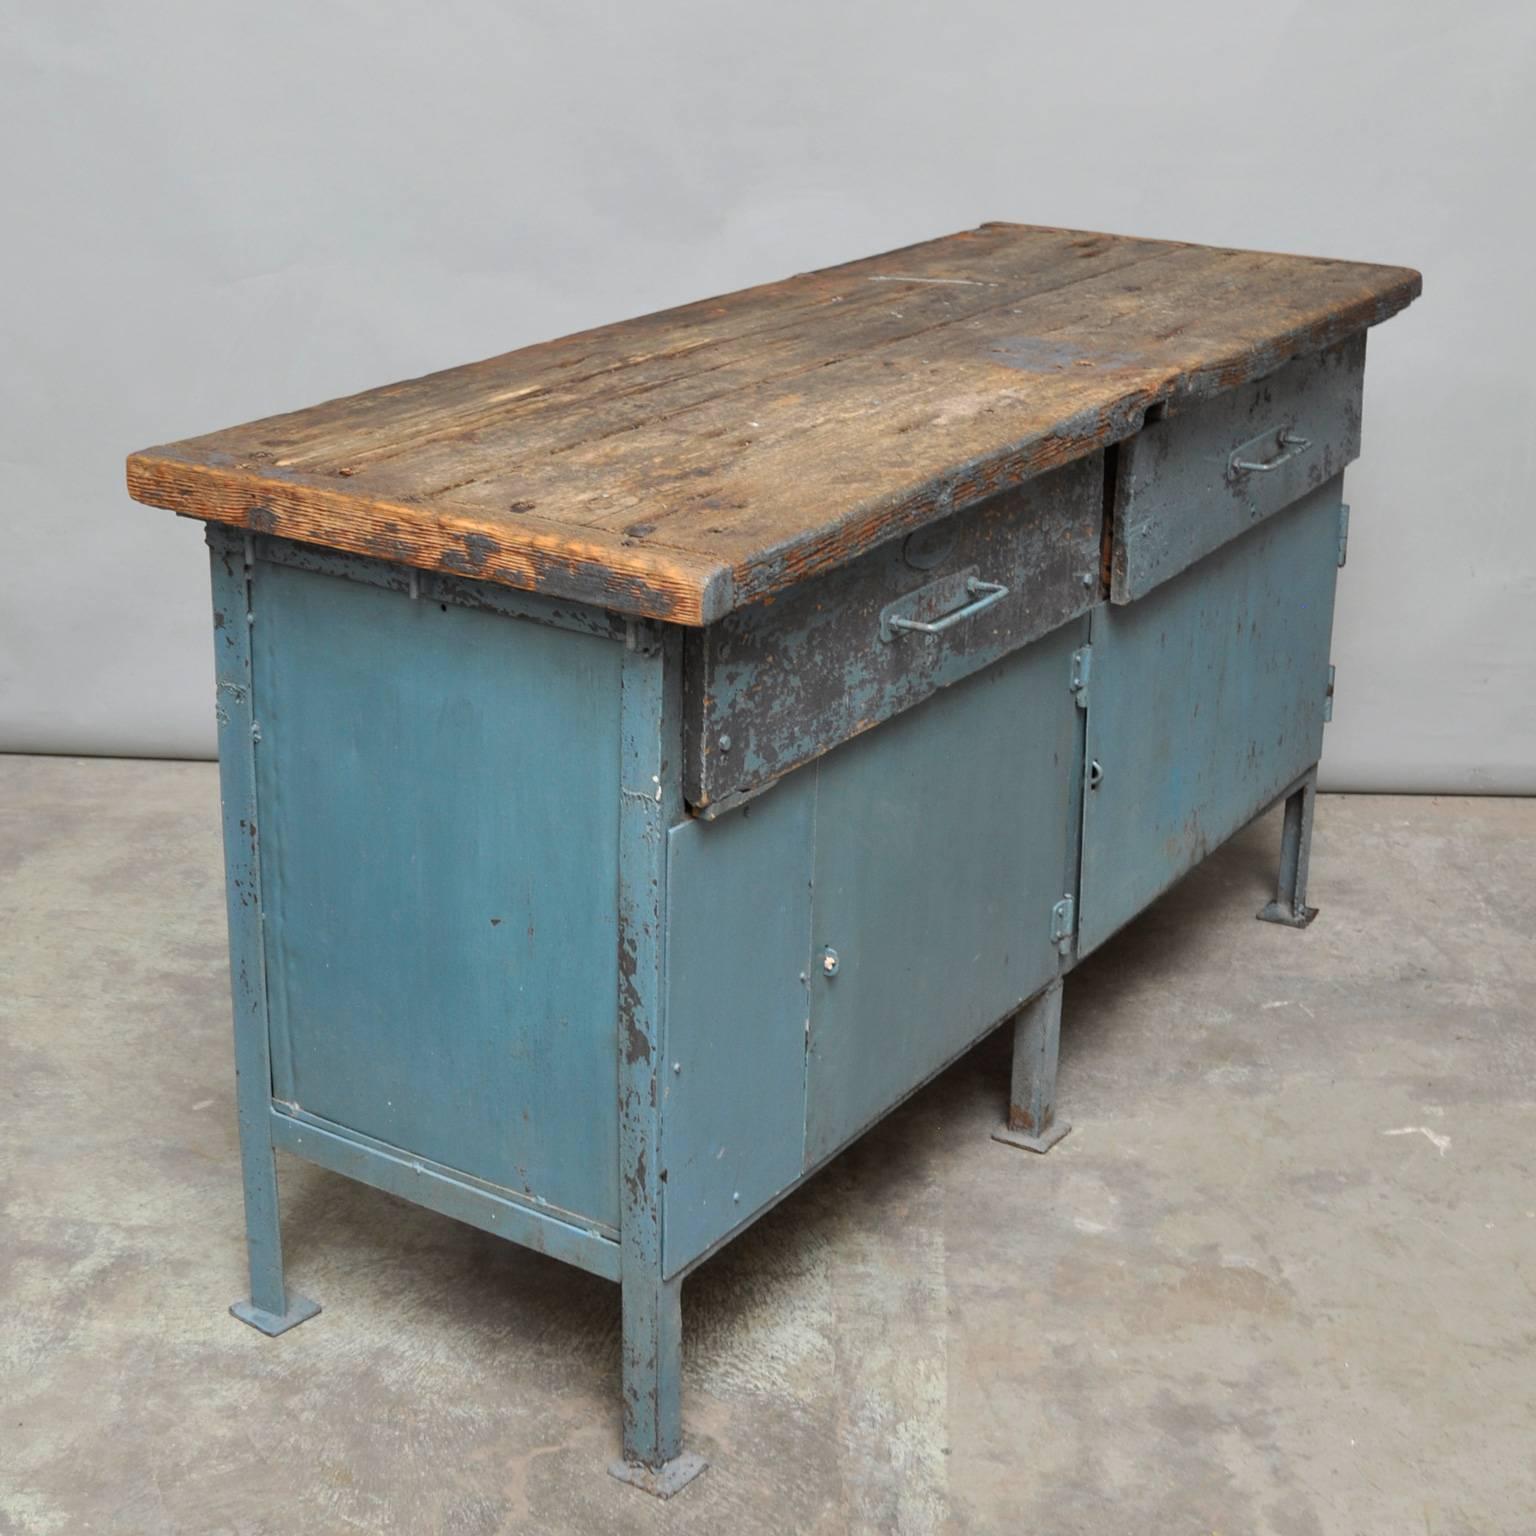 Hungarian Vintage Industrial Iron Workbench, 1950s